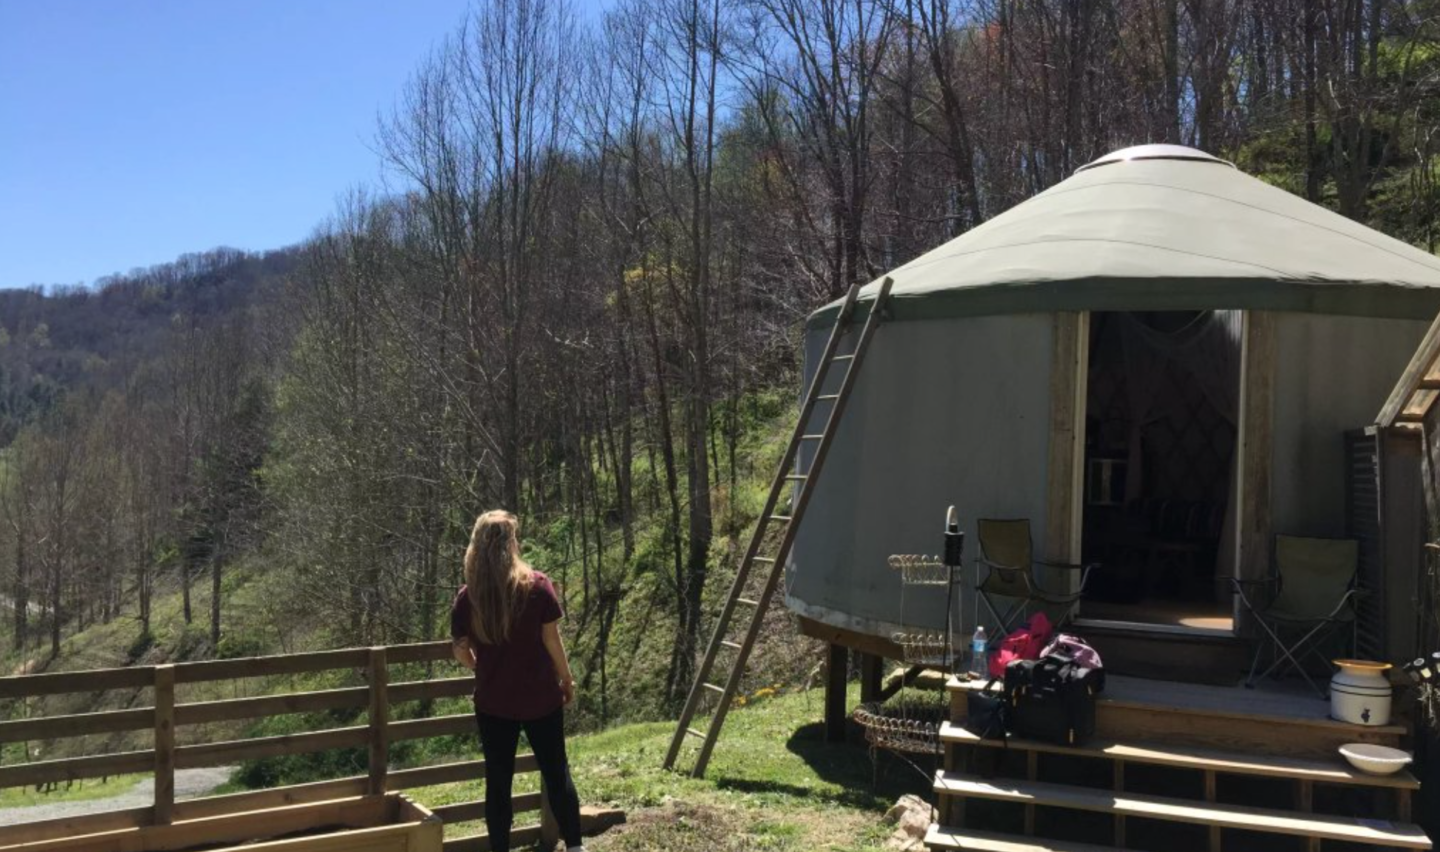 Me, My Friends, The Mountains…Oh and A Yurt